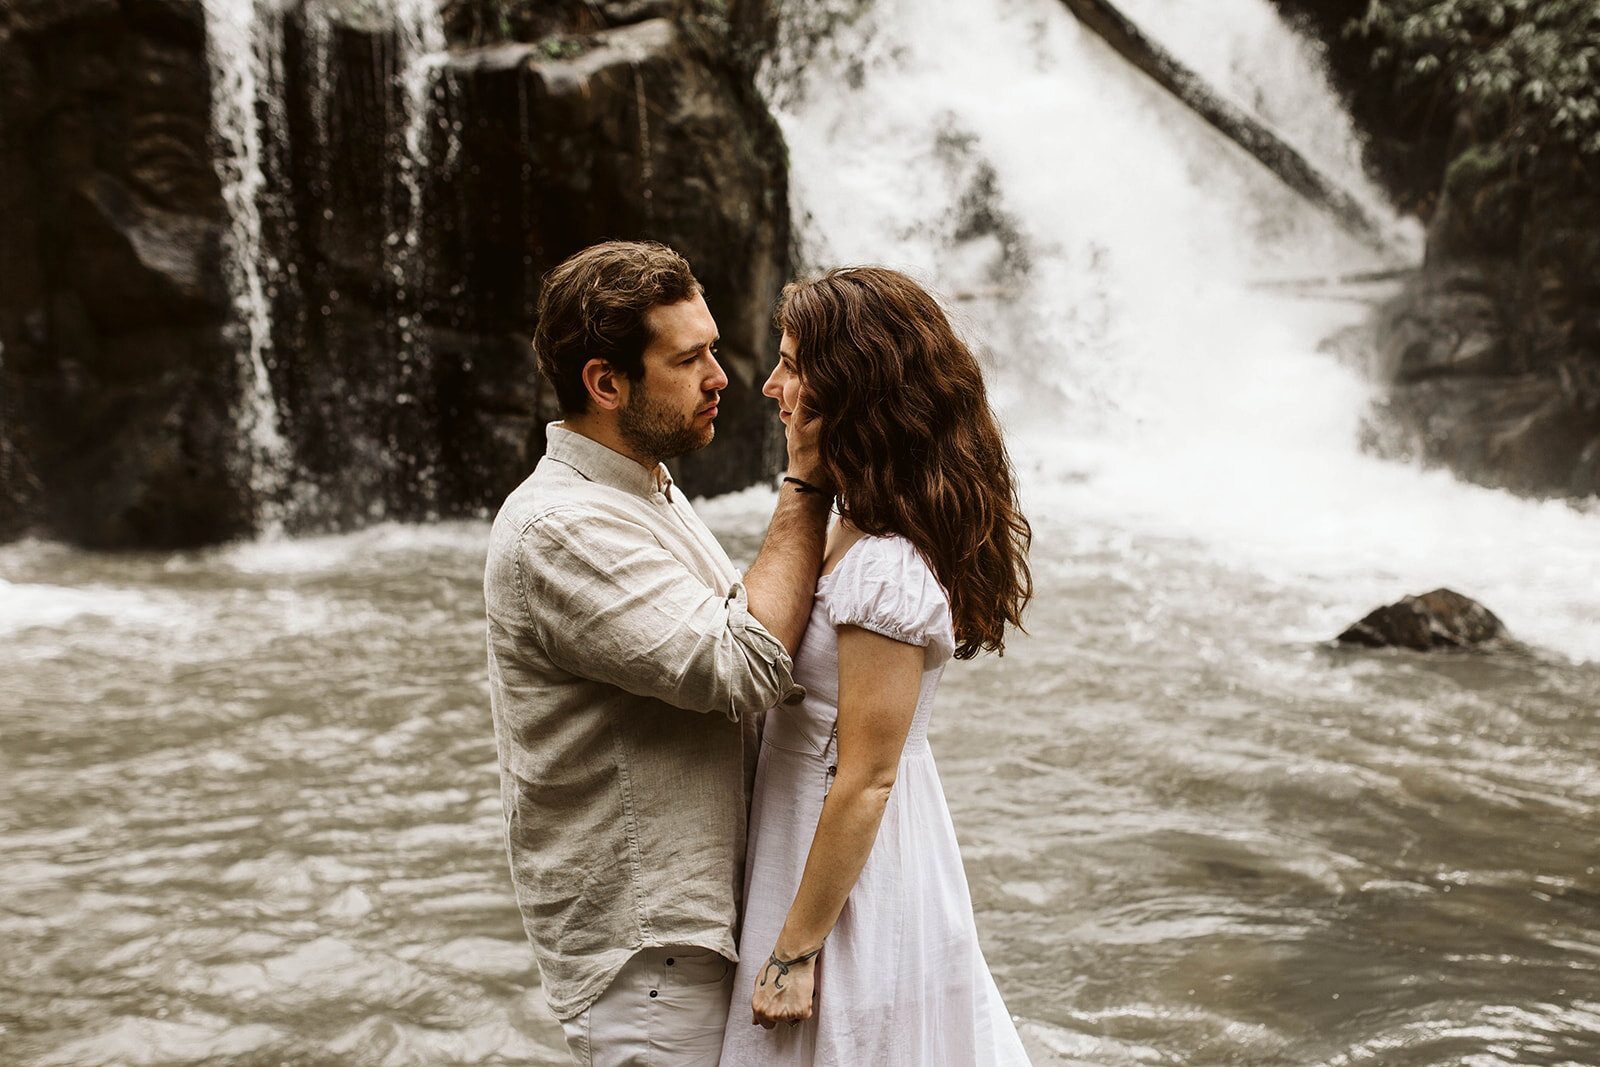 great-smoky-mountain-adventure-engagement-chattanooga-elopement-photographer5Y6A6021_websize.jpg